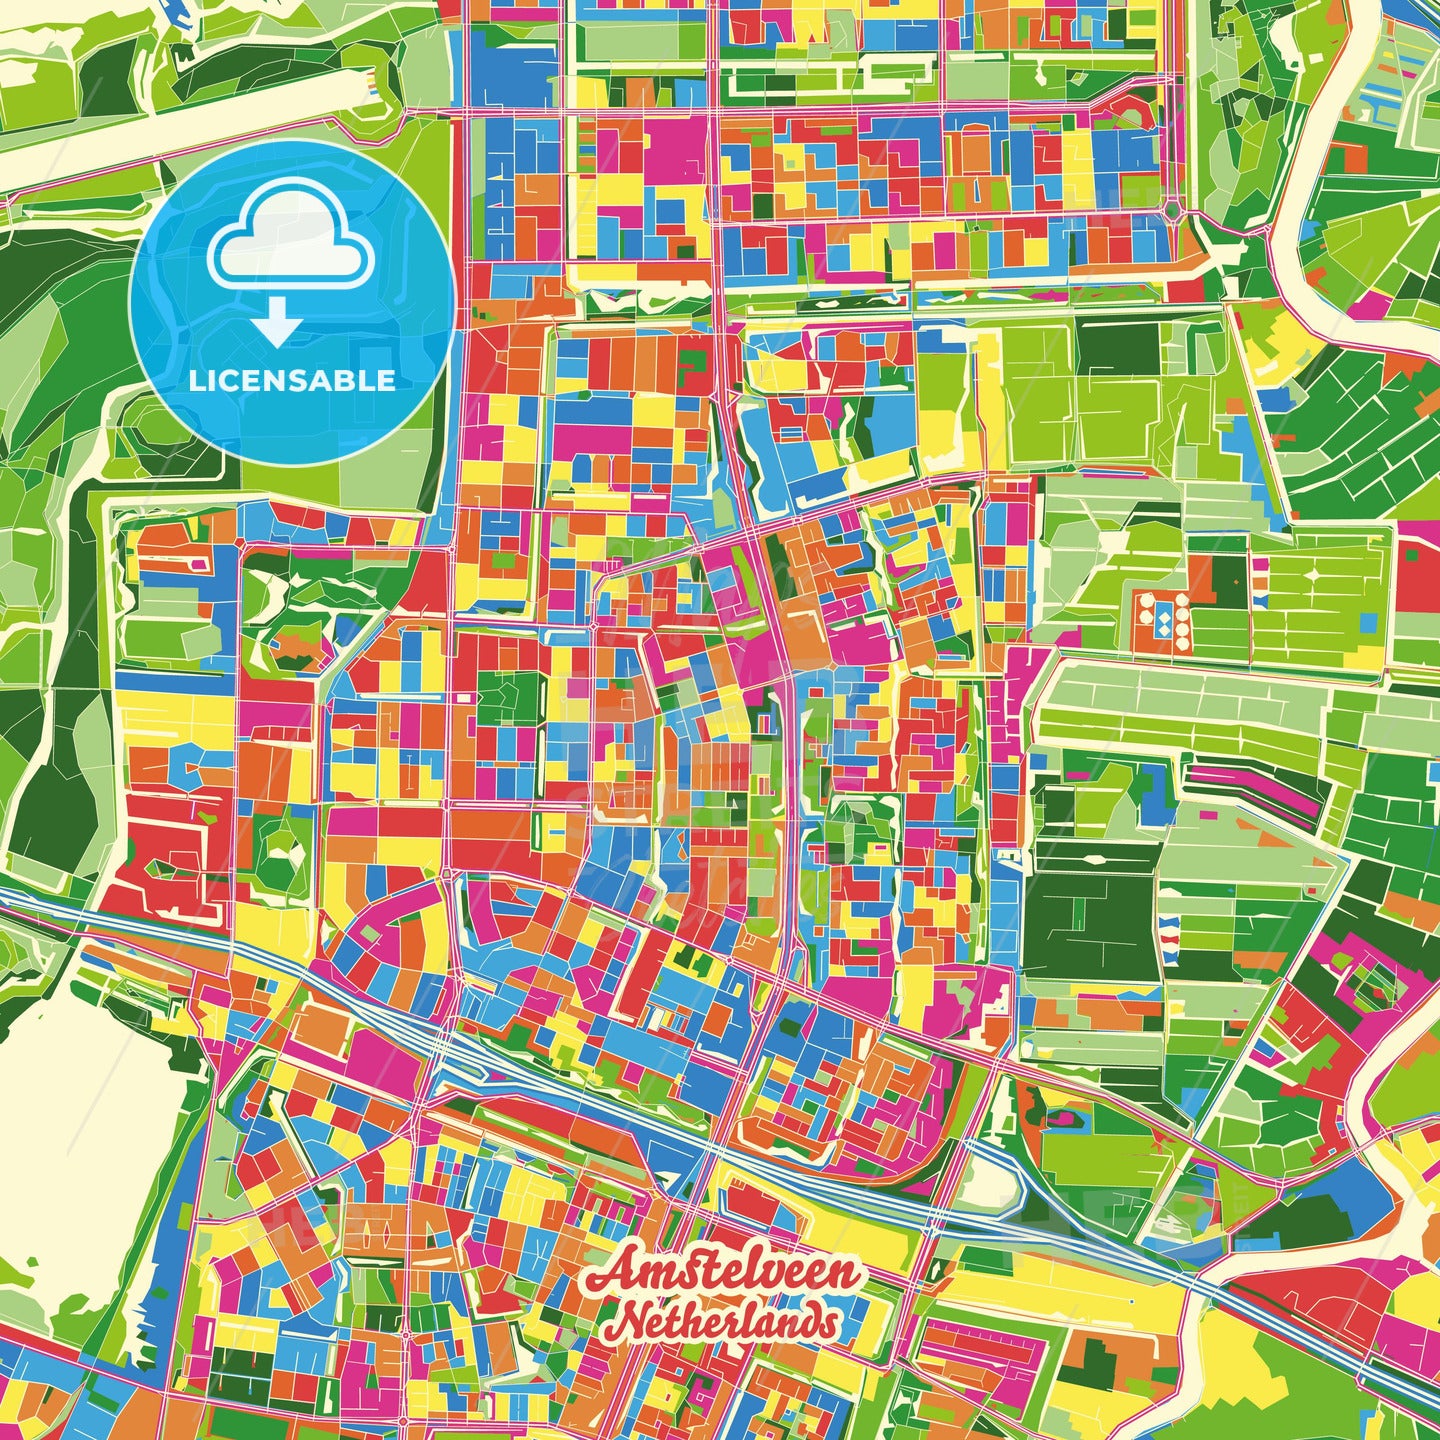 Amstelveen, Netherlands Crazy Colorful Street Map Poster Template - HEBSTREITS Sketches